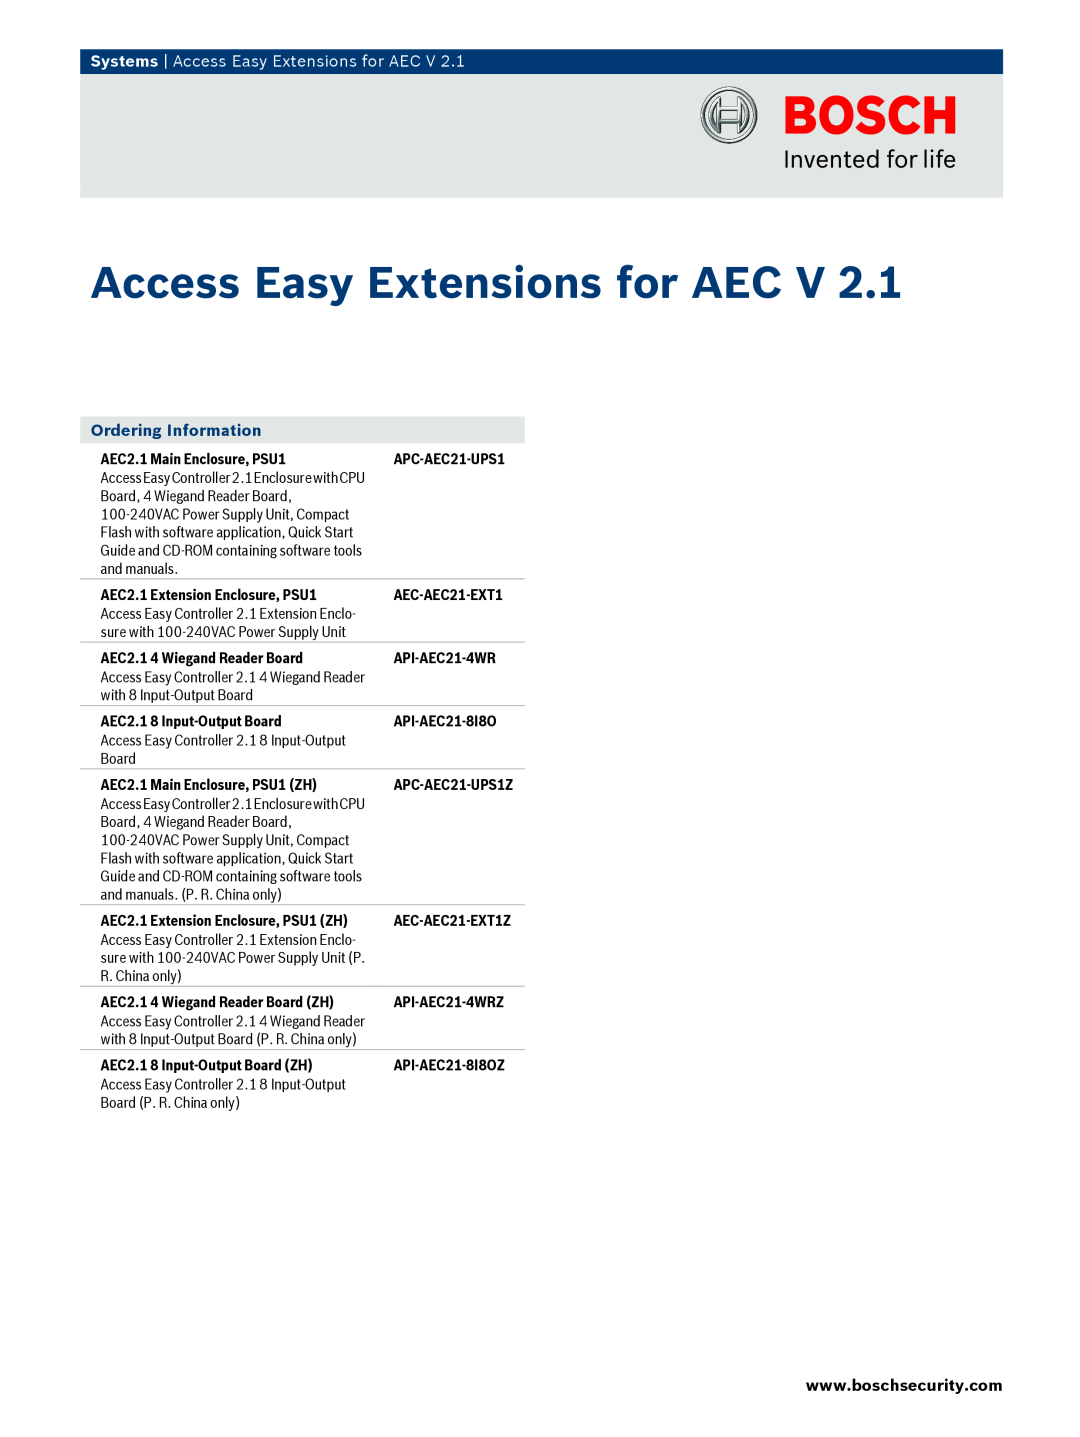 Bosch Appliances APC-AEC21-UPS1, API-AEC21-4WR quick start Systems Access Easy Extensions for AEC, Ordering Information 